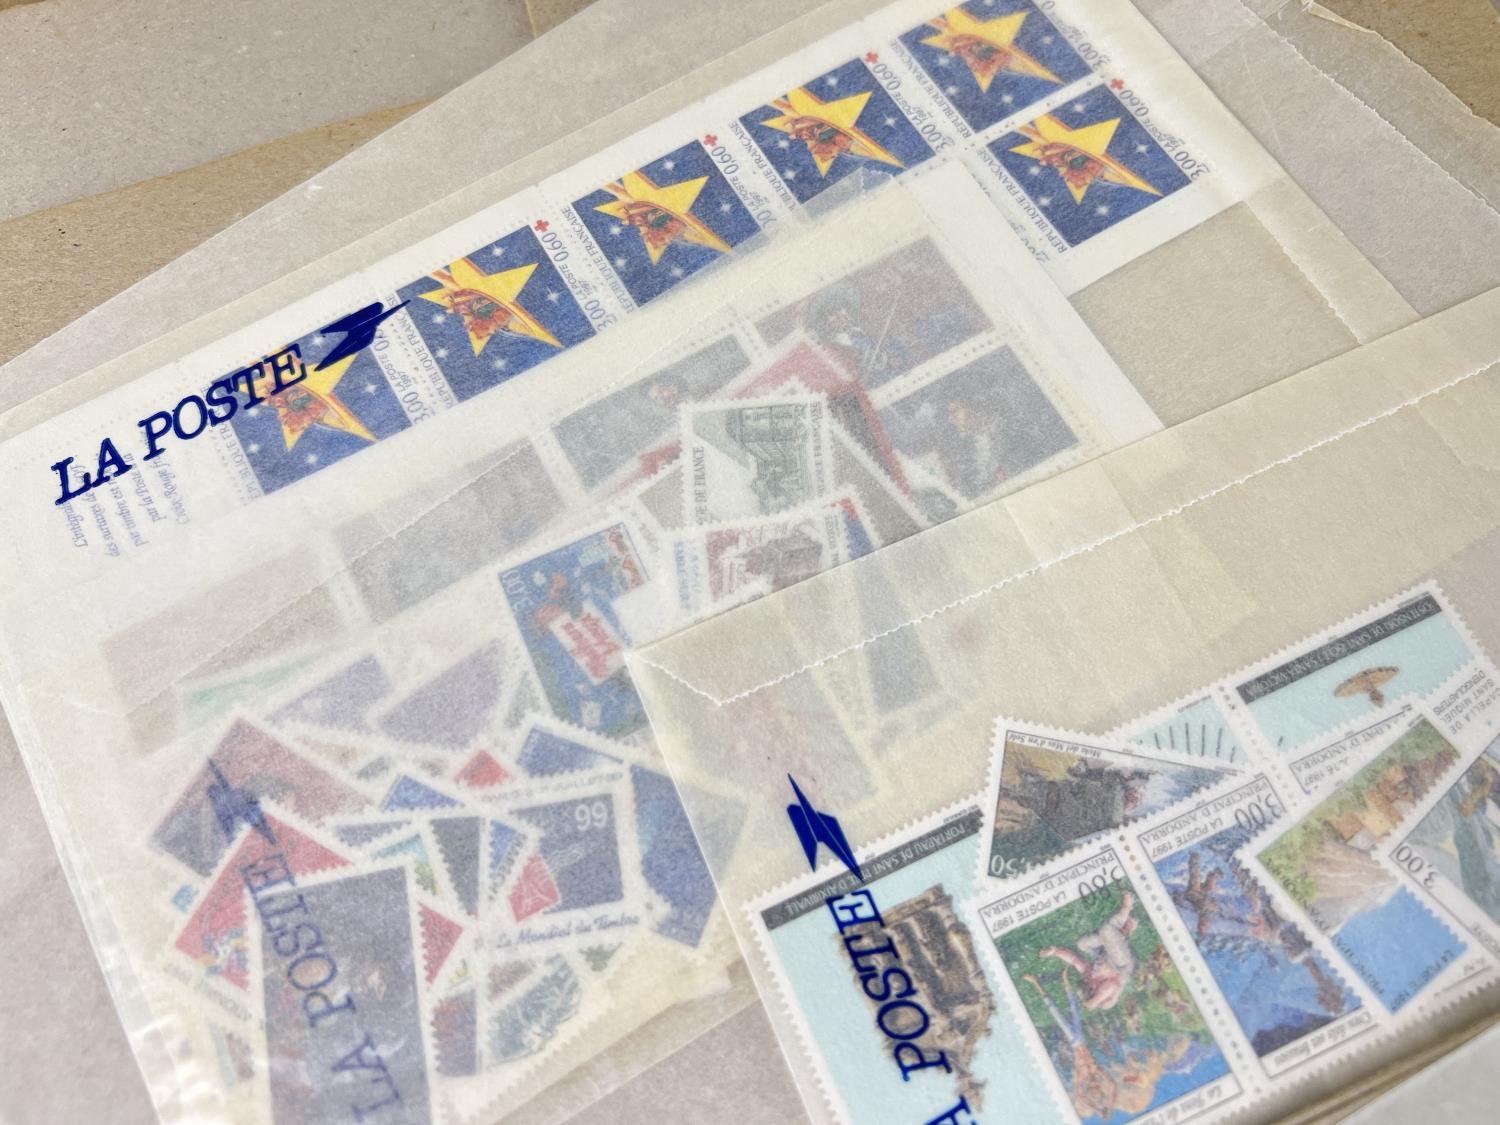 A collection of 1990's La Poste French postage stamps, in mint condition, with original invoices & - Image 2 of 4